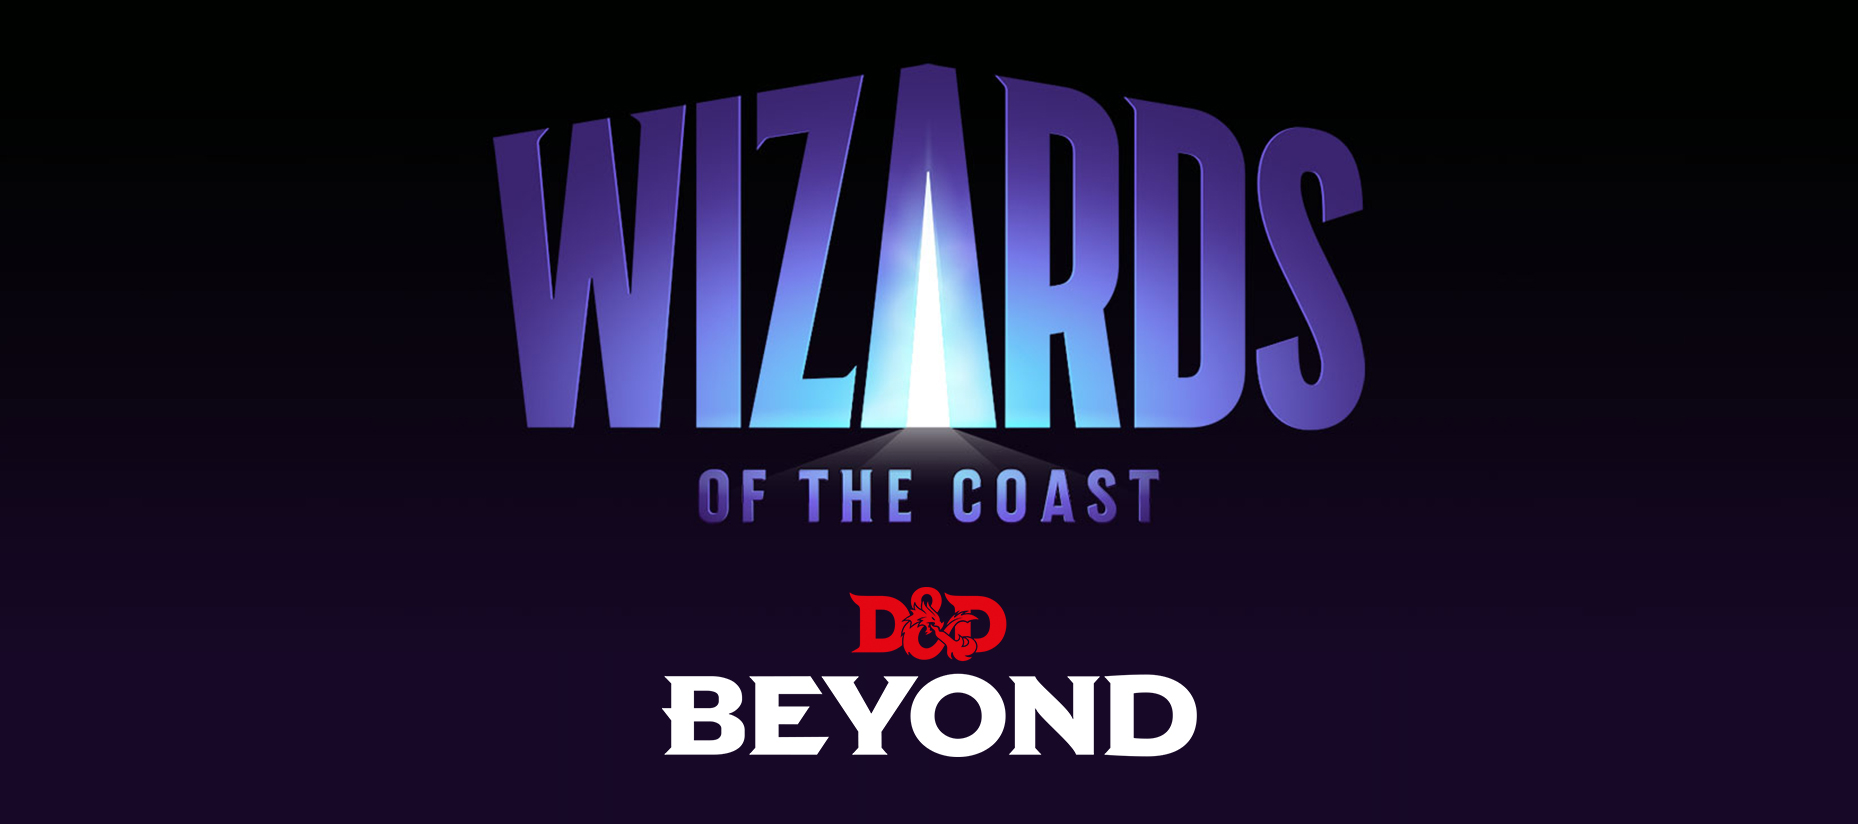 D&D Beyond x Wizards of the Coast